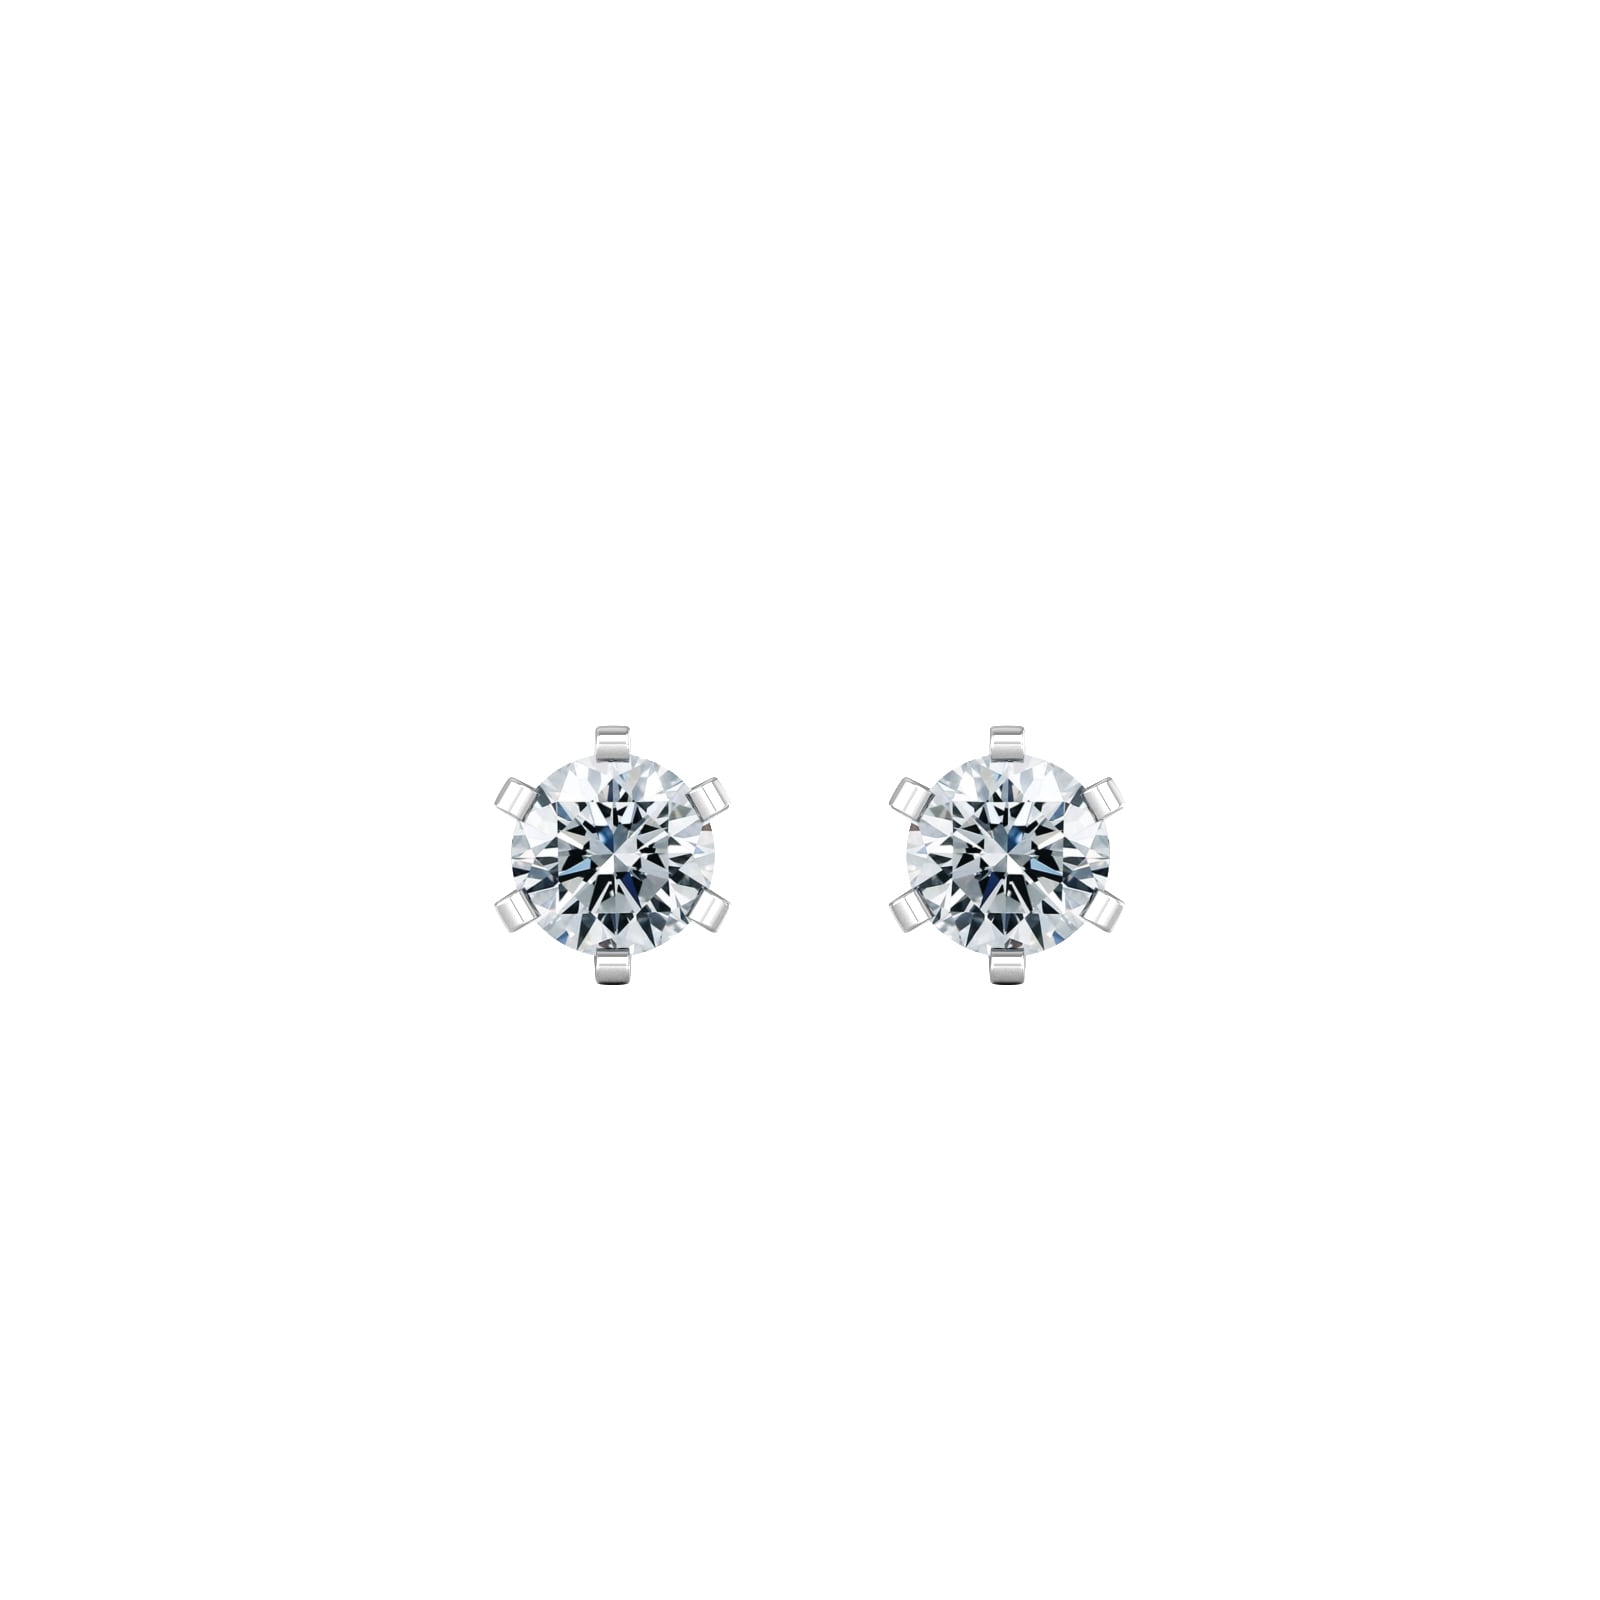 9ct White Gold 0.33cttw Solitaire Diamond Stud Earrings